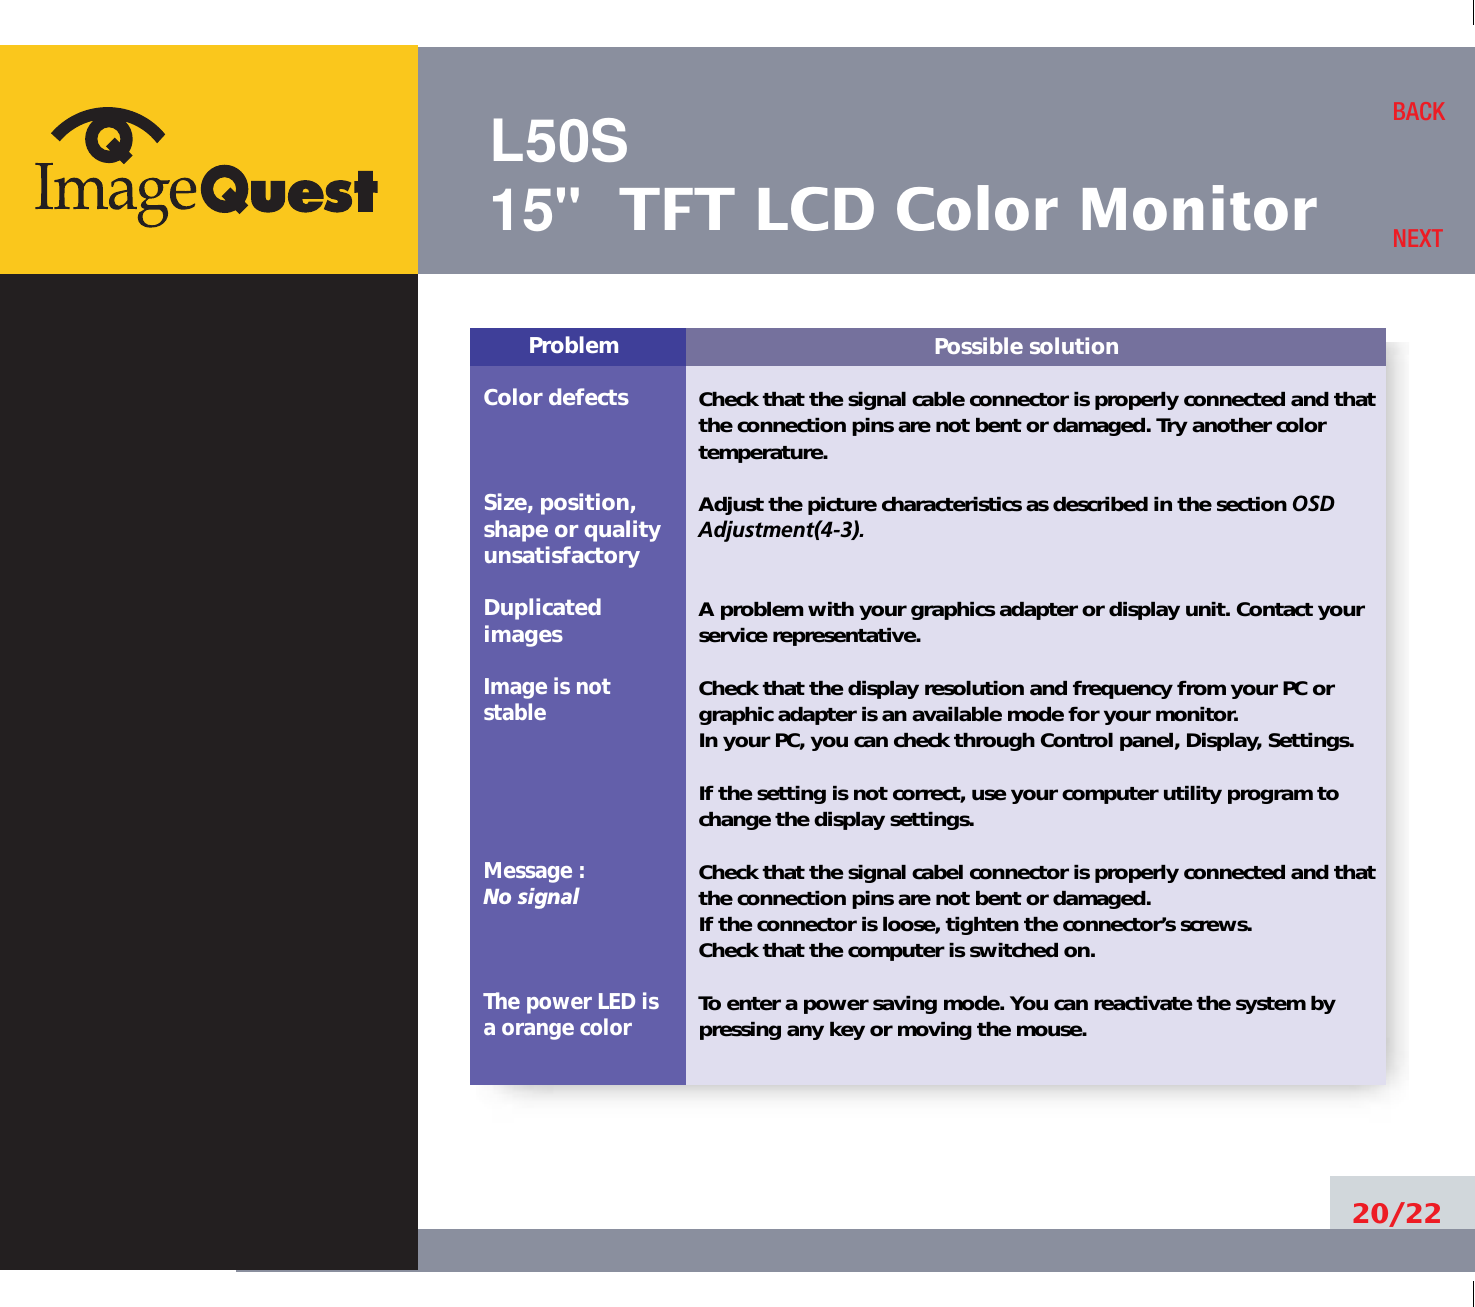 L50S15&quot; TFT LCD Color Monitor20/22BACKNEXTPossible solutionCheck that the signal cable connector is properly connected and thatthe connection pins are not bent or damaged. Try another colortemperature. Adjust the picture characteristics as described in the section OSDAdjustment(4-3).A problem with your graphics adapter or display unit. Contact yourservice representative.Check that the display resolution and frequency from your PC orgraphic adapter is an available mode for your monitor.In your PC, you can check through Control panel, Display, Settings.If the setting is not correct, use your computer utility program tochange the display settings.Check that the signal cabel connector is properly connected and thatthe connection pins are not bent or damaged.If the connector is loose, tighten the connector’s screws.Check that the computer is switched on.To enter a power saving mode. You can reactivate the system bypressing any key or moving the mouse.ProblemColor defectsSize, position,shape or qualityunsatisfactoryDuplicatedimagesImage is notstableMessage : No signalThe power LED isa orange color